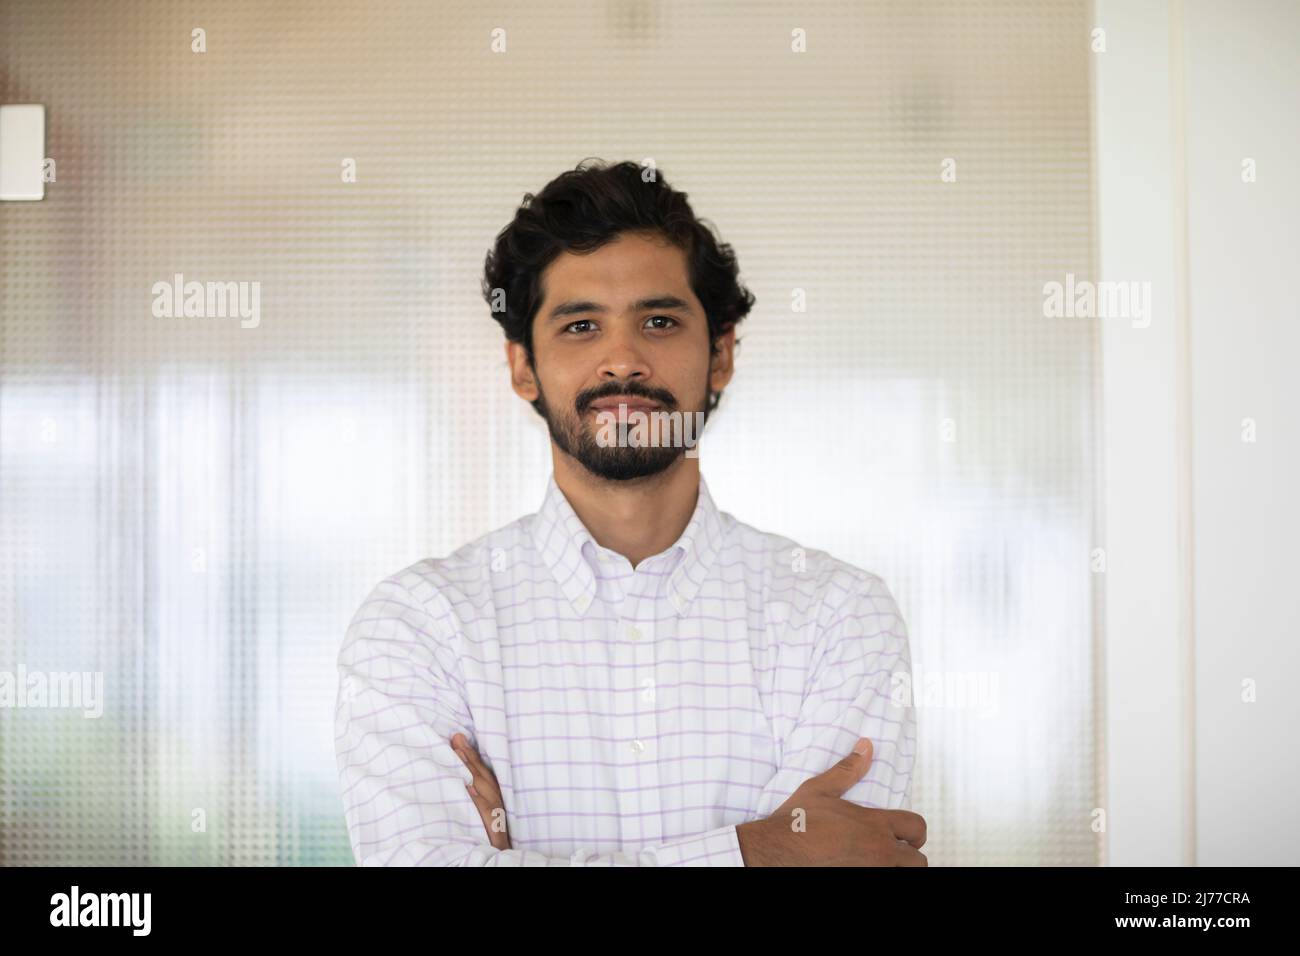 young man working as manager in an office in front off a glass door Stock Photo